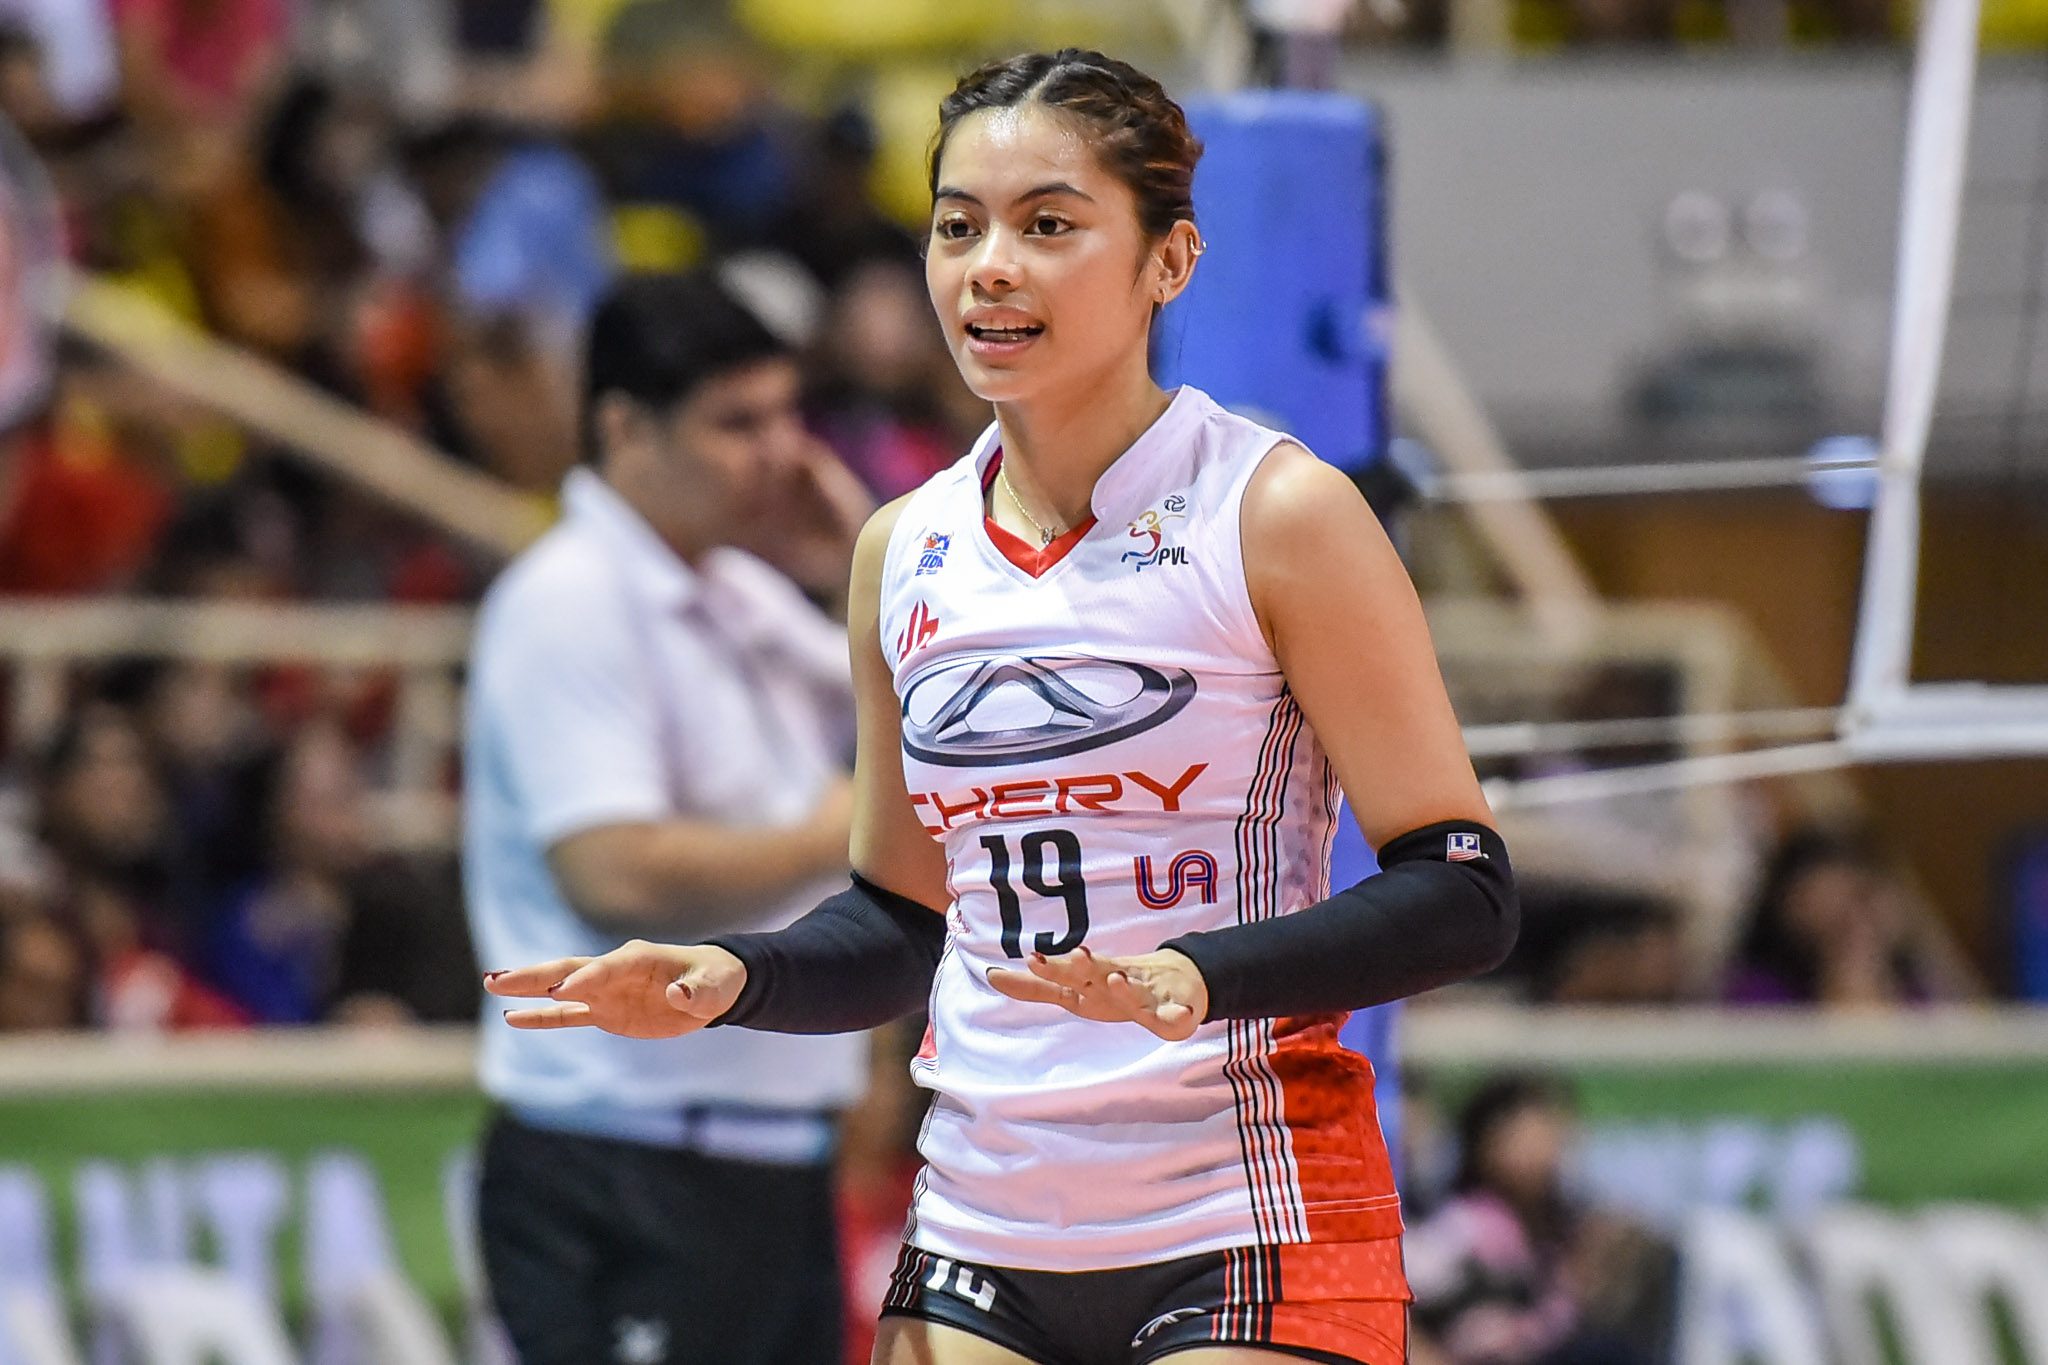 PVL Player of the Week Nierva salutes Creamline system, praises Chery adapting to win